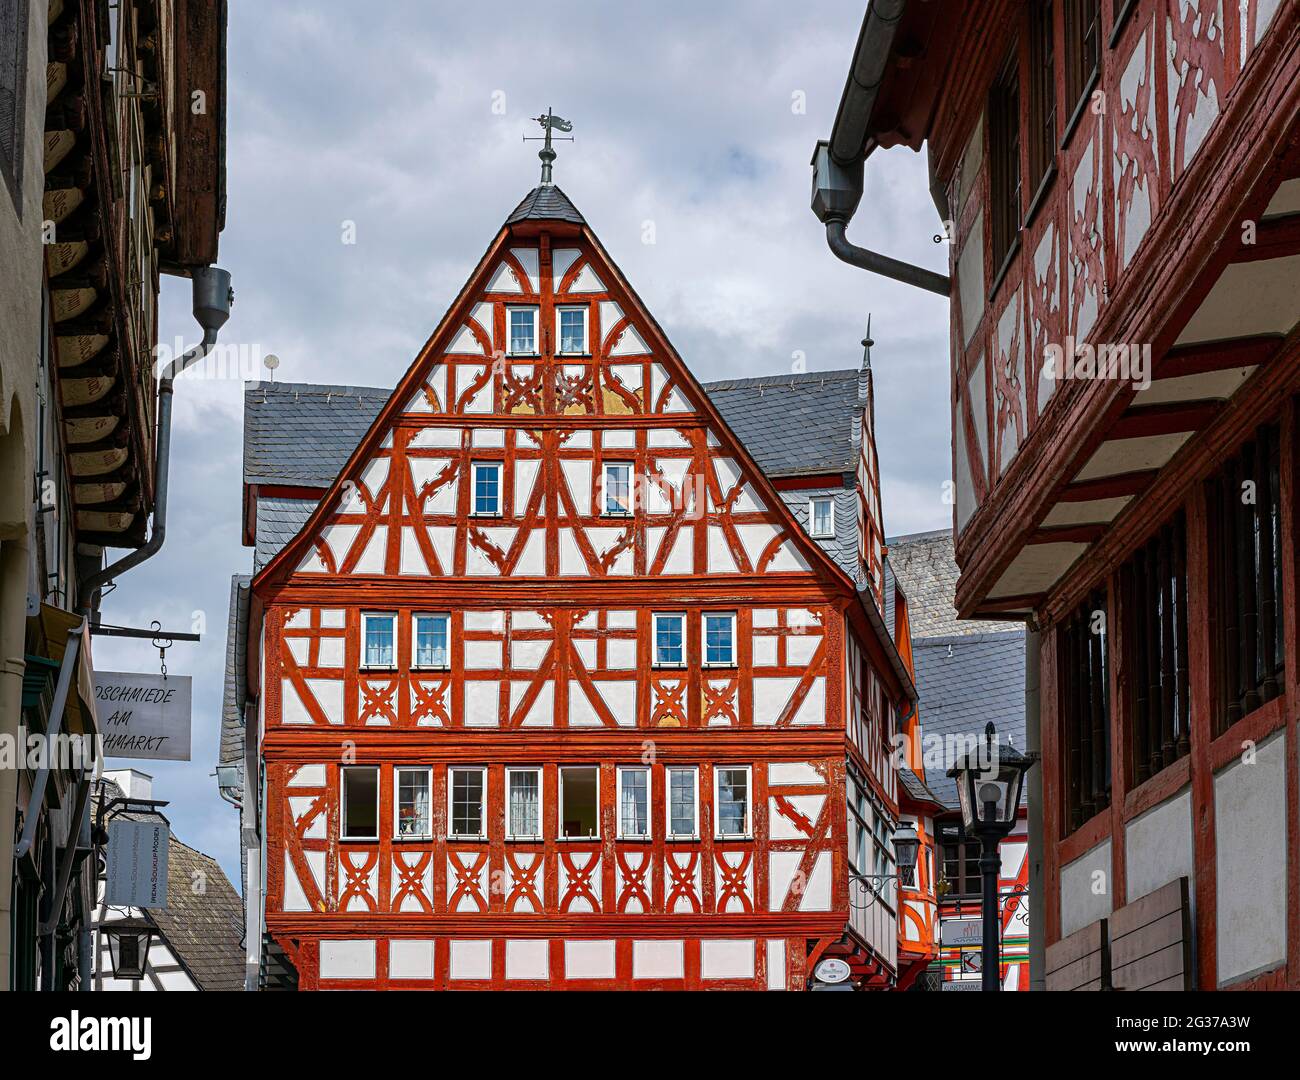 Half-timbered houses in the old town of Limburg, Hesse, Germany Stock Photo